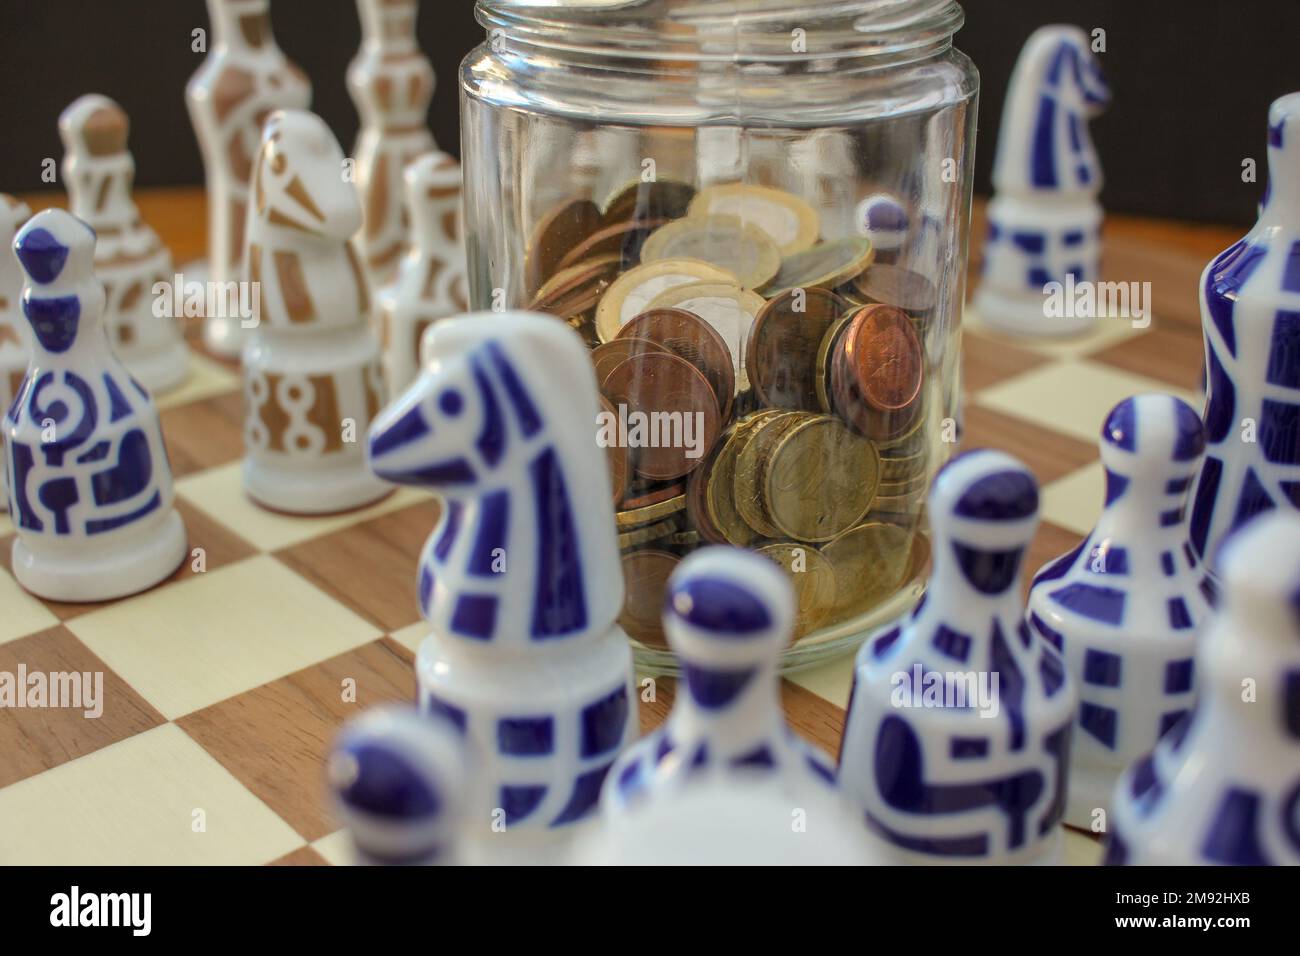 euro coins in a glass jar on the chessboard among chess pieces Stock Photo